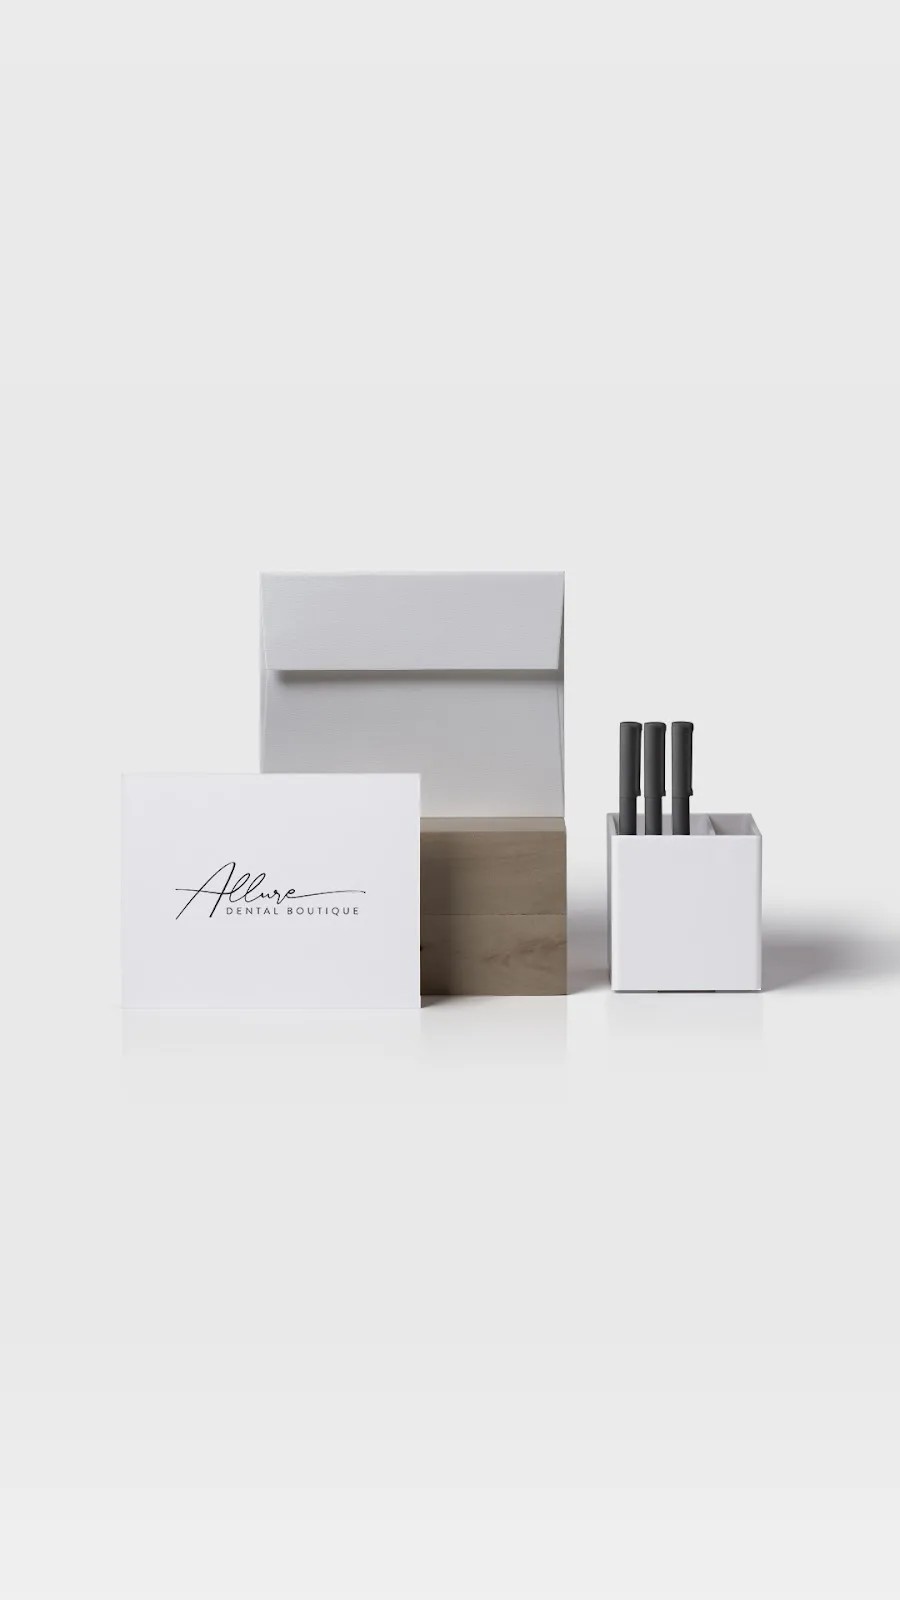 Minimalistic branding materials including business cards, boxes, and bottles on a white background.